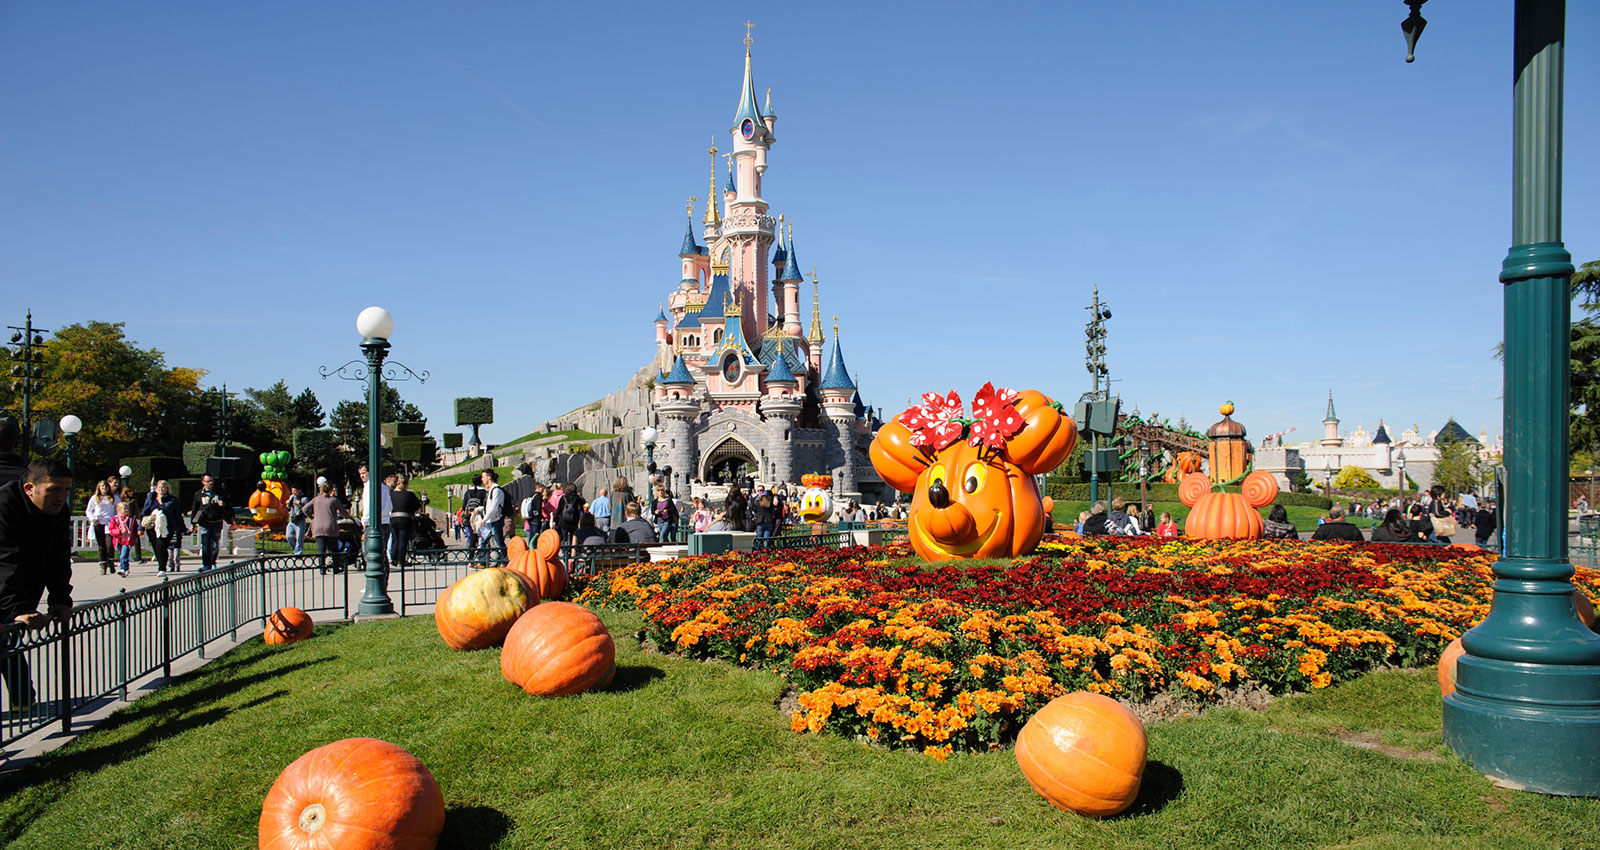 Paris and Disneyland offers for uniformed groups